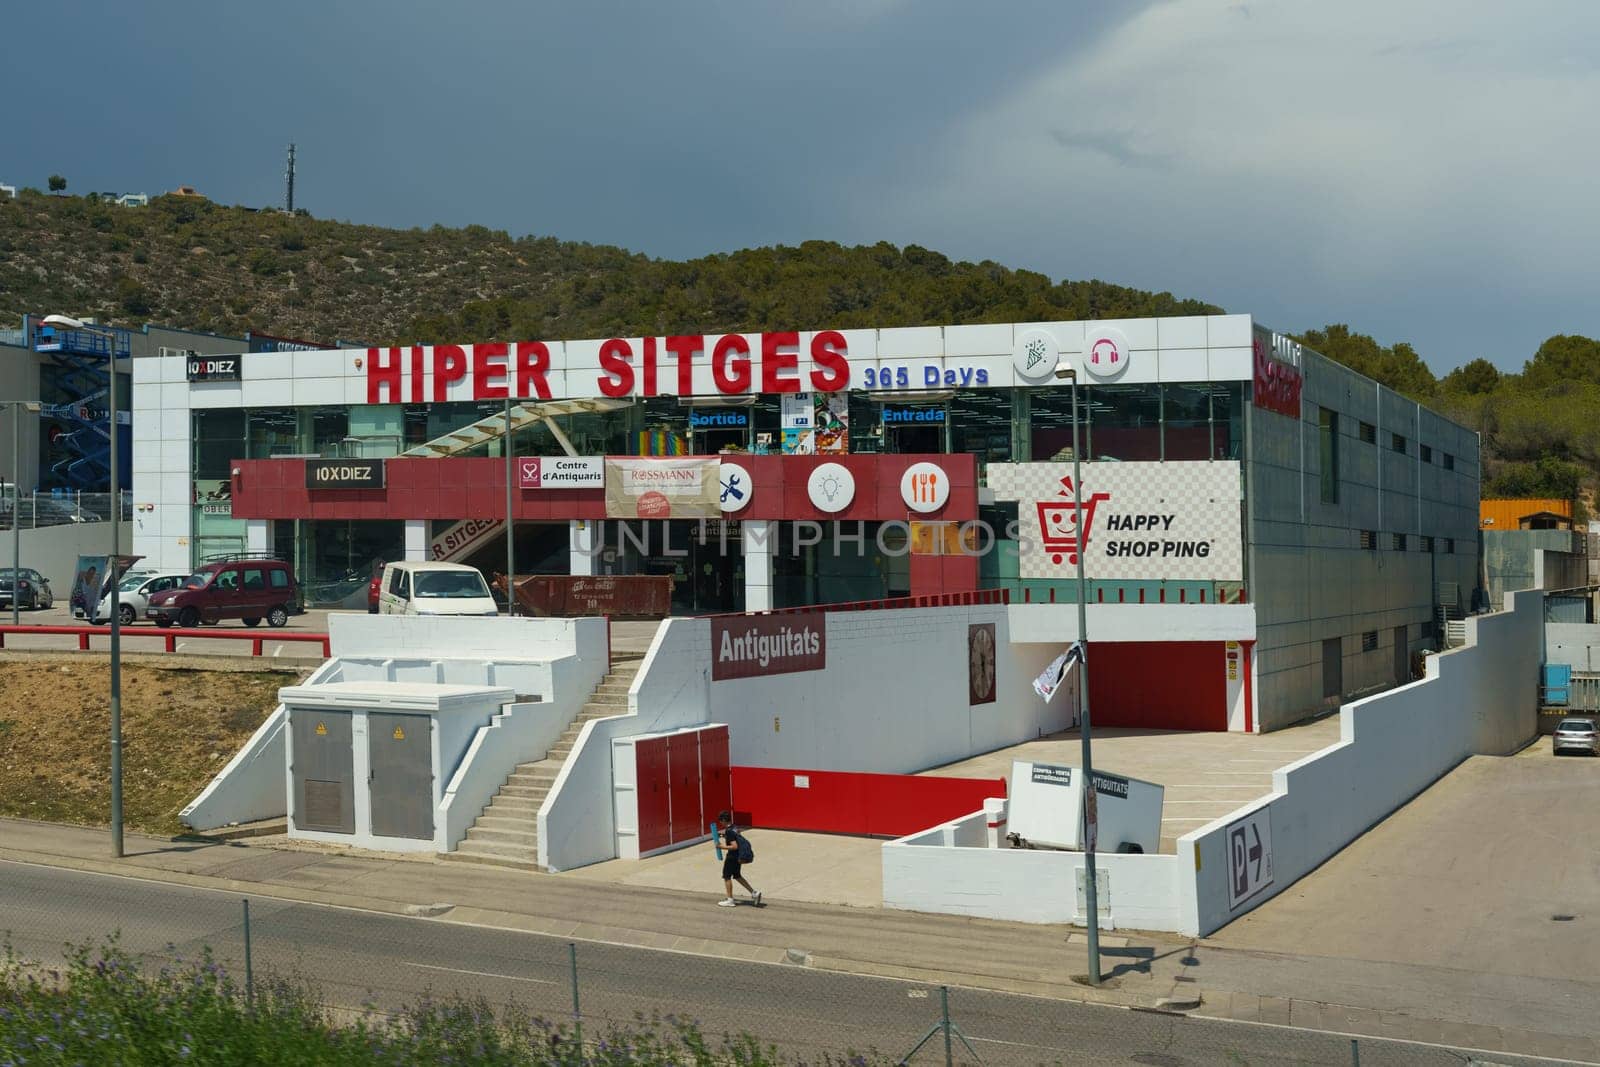 Barcelona, Spain - May 24, 2023: A contemporary two-story commercial building HIPER SITGES with bold signage, flanked by a road and green hills under a clear sky.